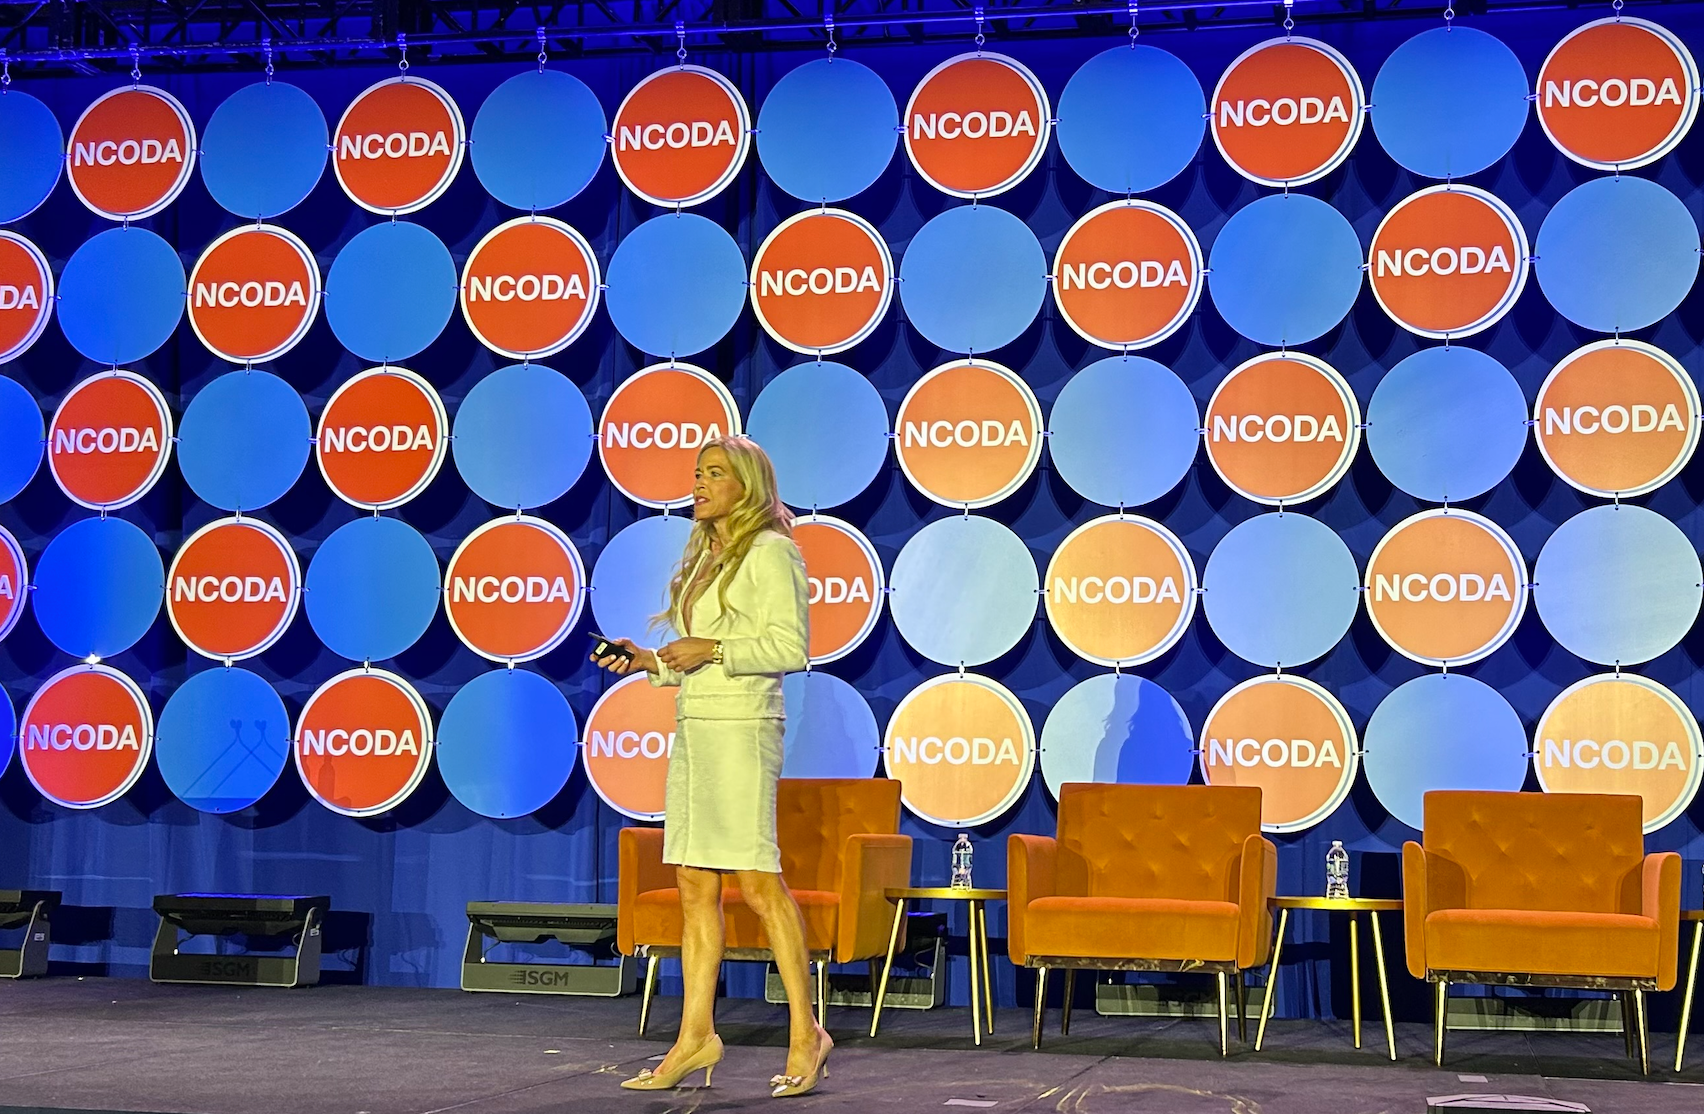 Dawn Mussallem, DO, DipABLM, discusses the importance of dietary health in cancer prevention during the keynote presentation at the 2023 NCODA International Spring Forum.